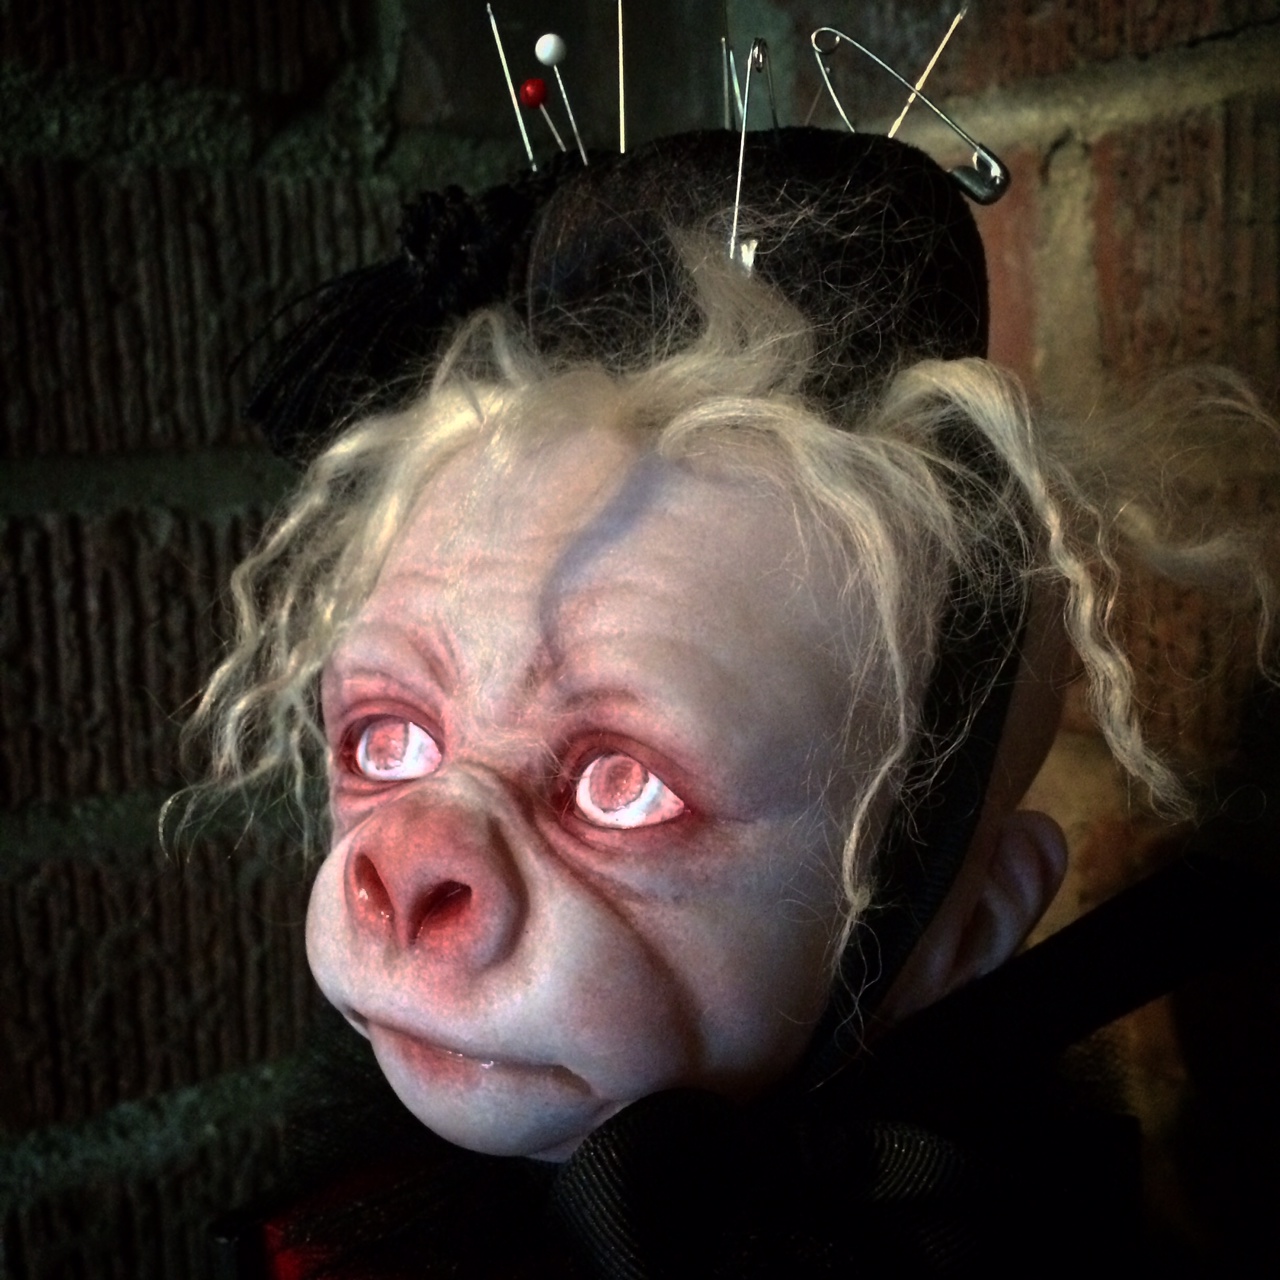 close-up pale, albino gorilla face doll head with red open eyes and blond hair wearing a black pin cushion with a red tassel on his head